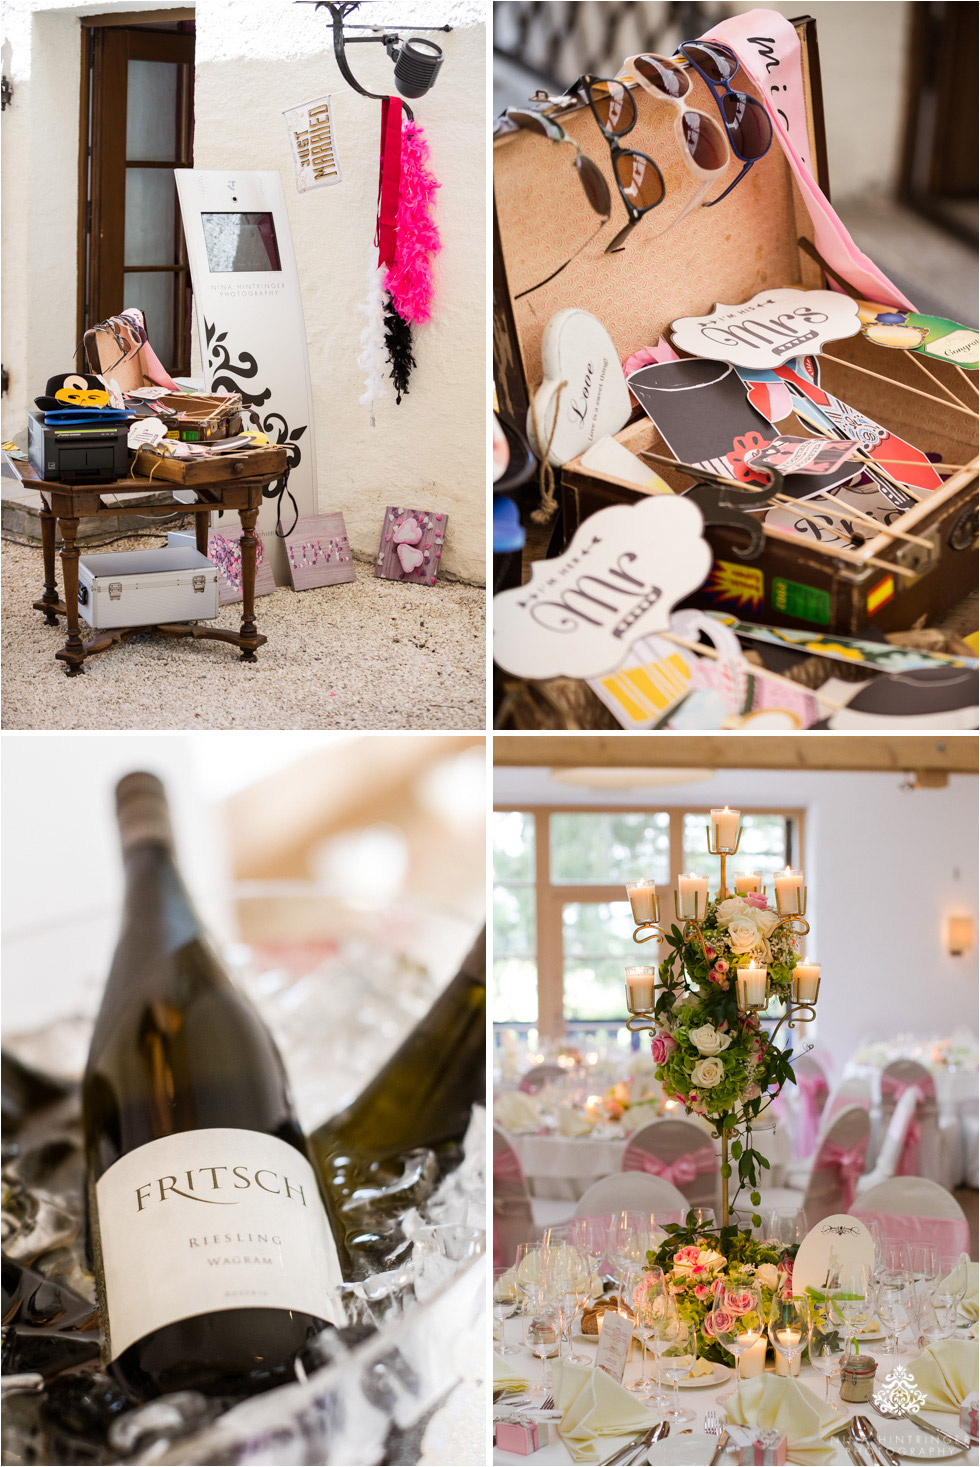 Centerpieces, wine bottle and PhotoBooth for some fun on the wedding day at Schloss Prielau, Zell am See, Salzburg, Austria - Blog of Nina Hintringer Photography - Wedding Photography, Wedding Reportage and Destination Weddings